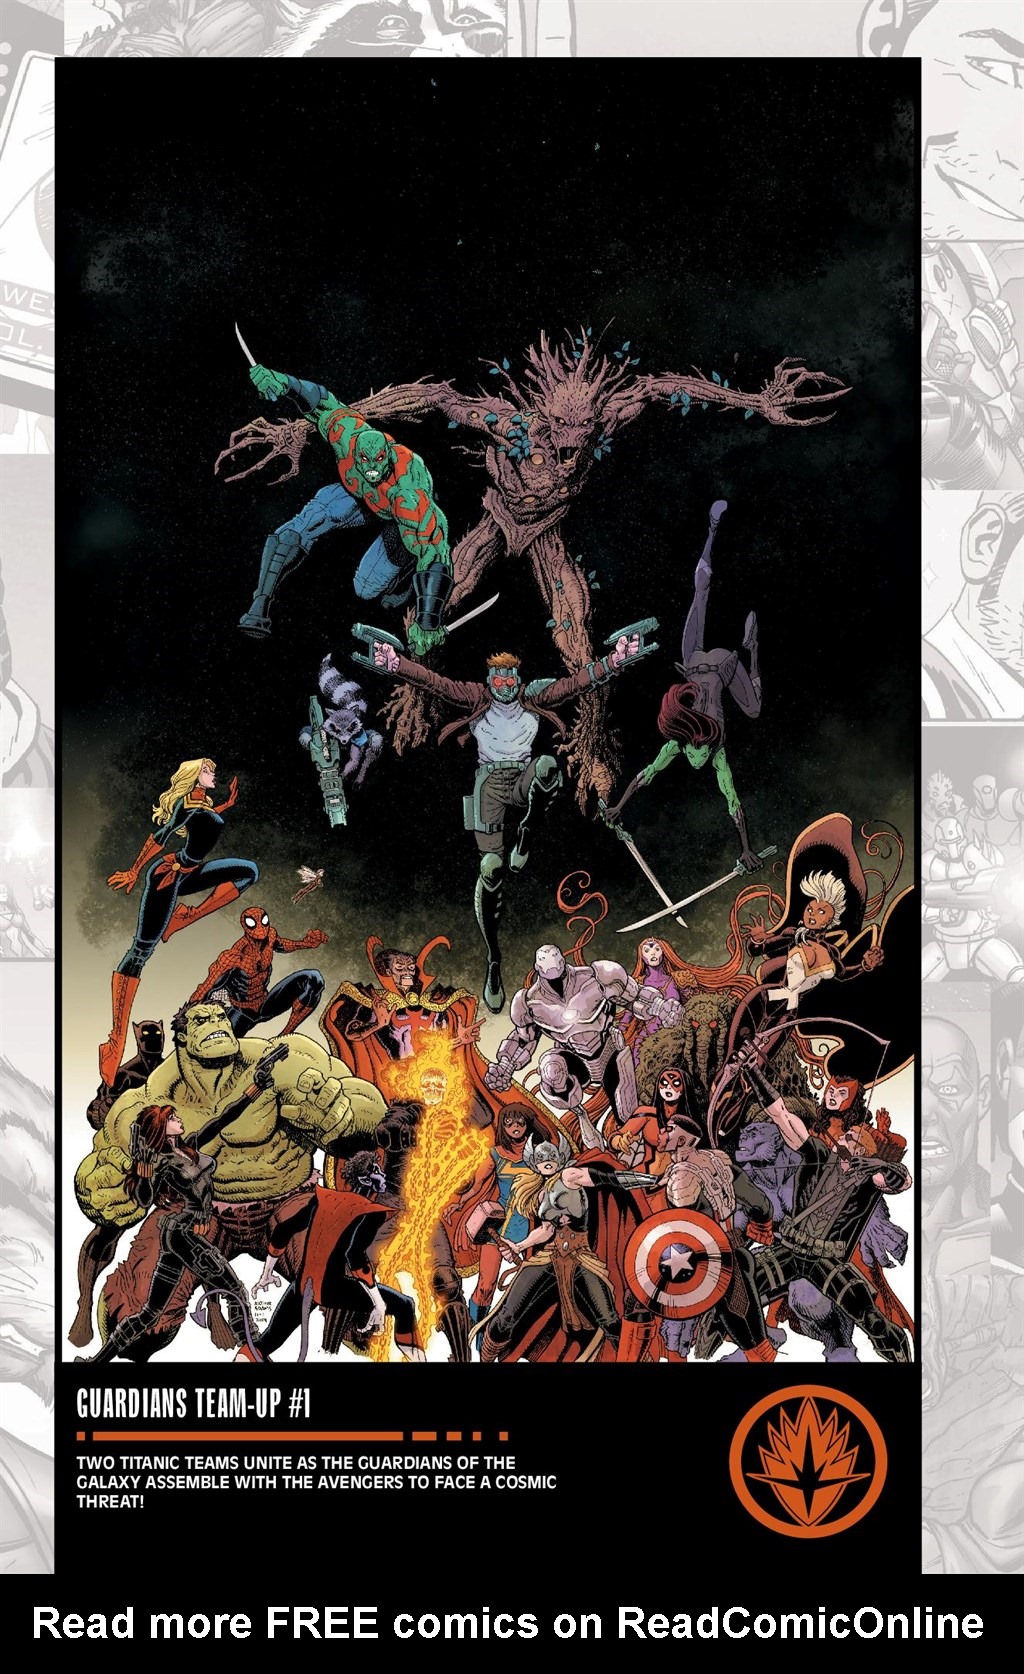 Read online Marvel-Verse: Guardians of the Galaxy comic -  Issue # TPB - 5